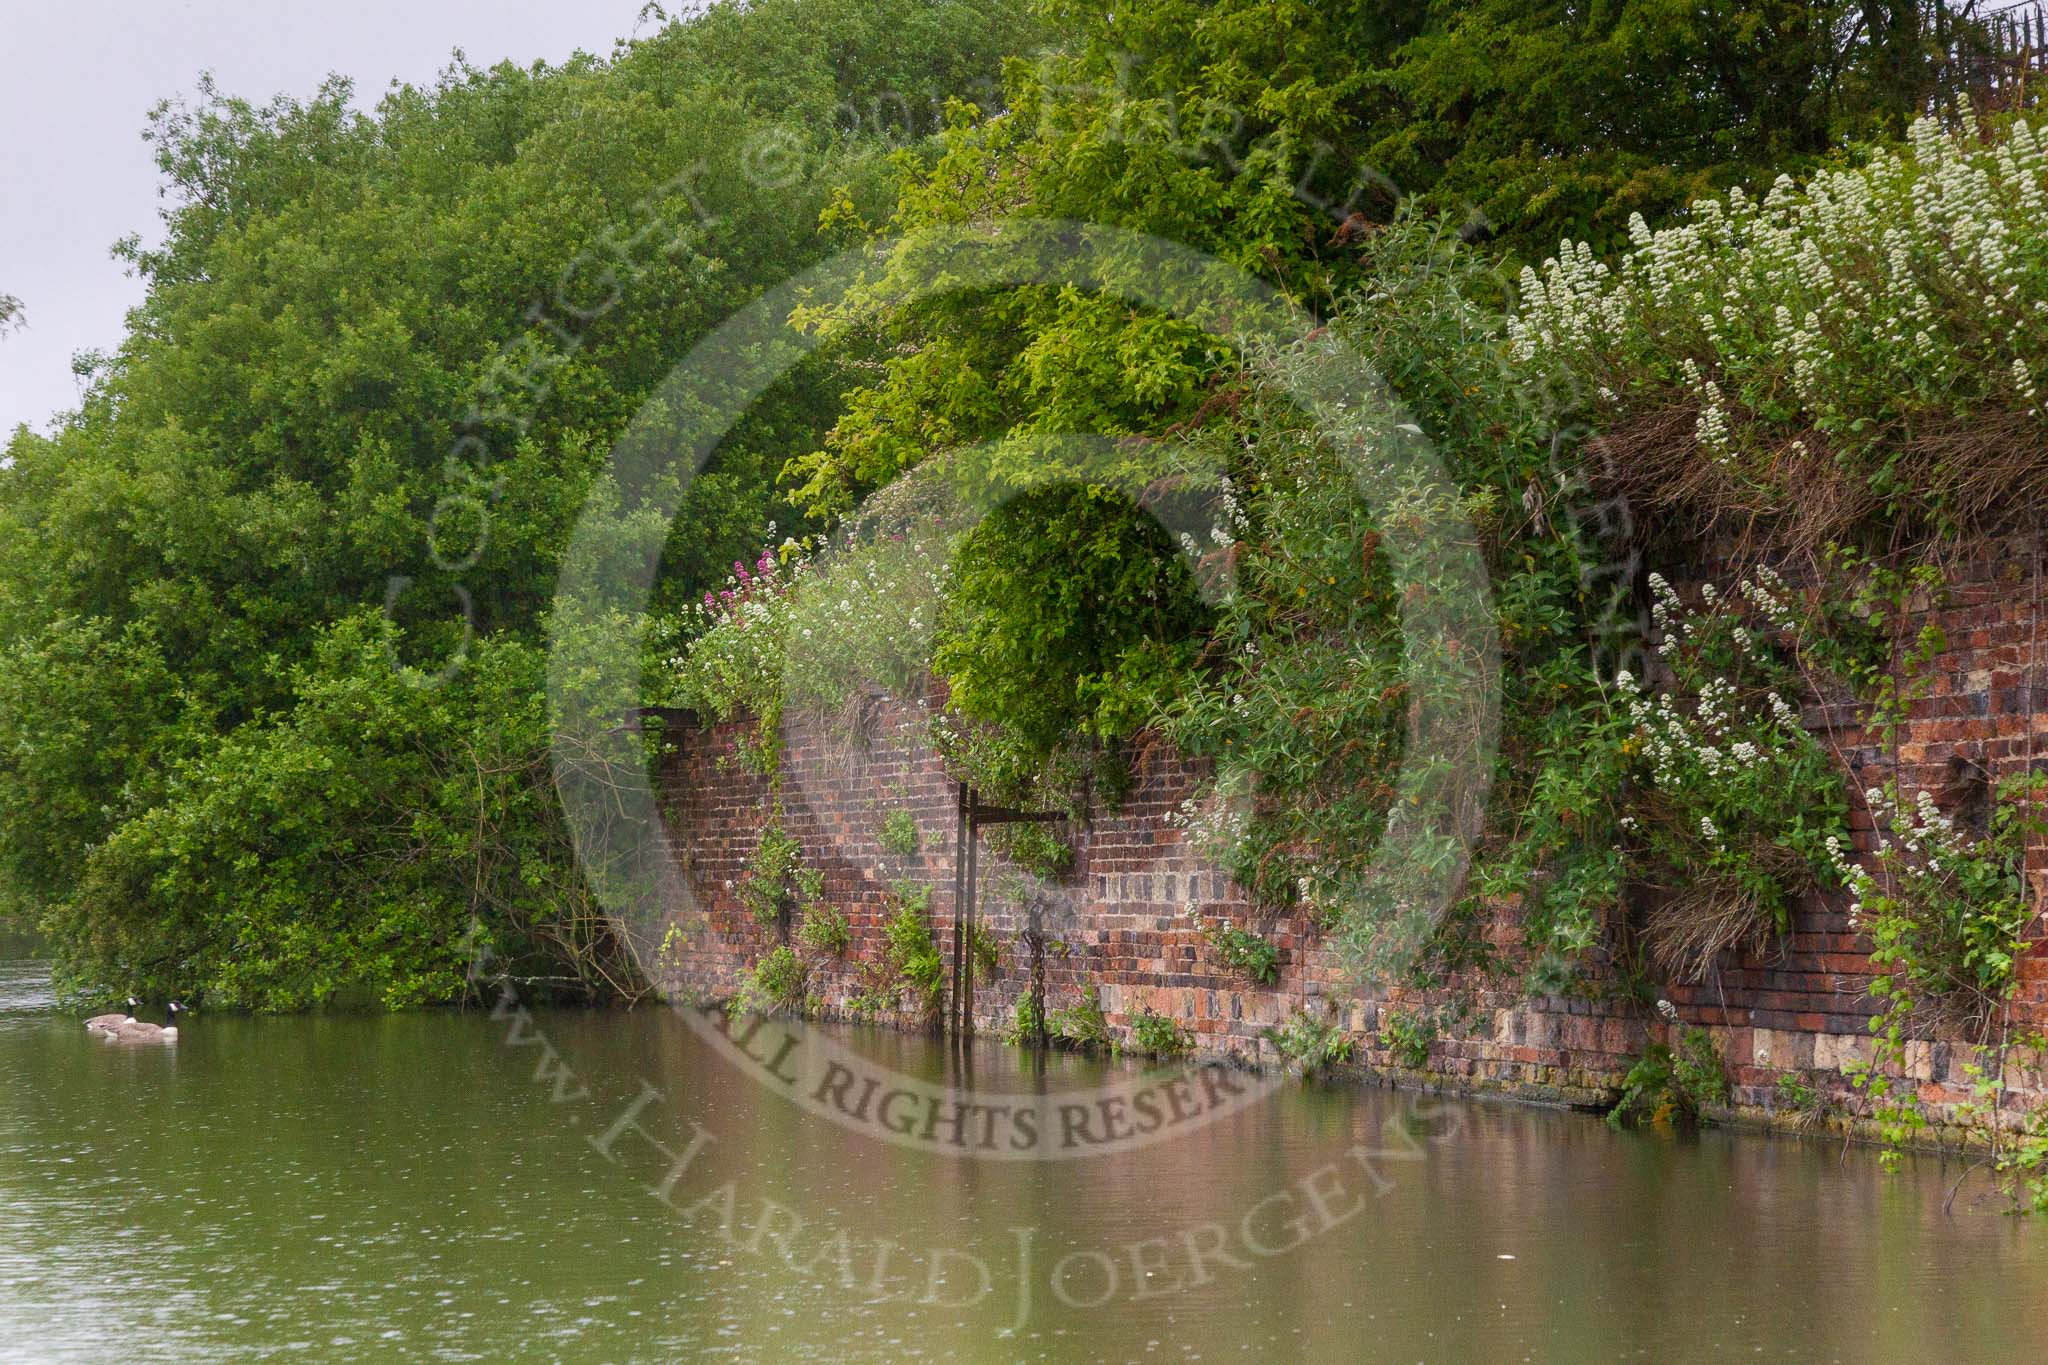 BCN Marathon Challenge 2014: The site of the former Netherton Iron Works on the Dudley No 1 Canal, between  Bishtons Bridge and Primrose Bridge.
Birmingham Canal Navigation,


United Kingdom,
on 25 May 2014 at 06:52, image #208